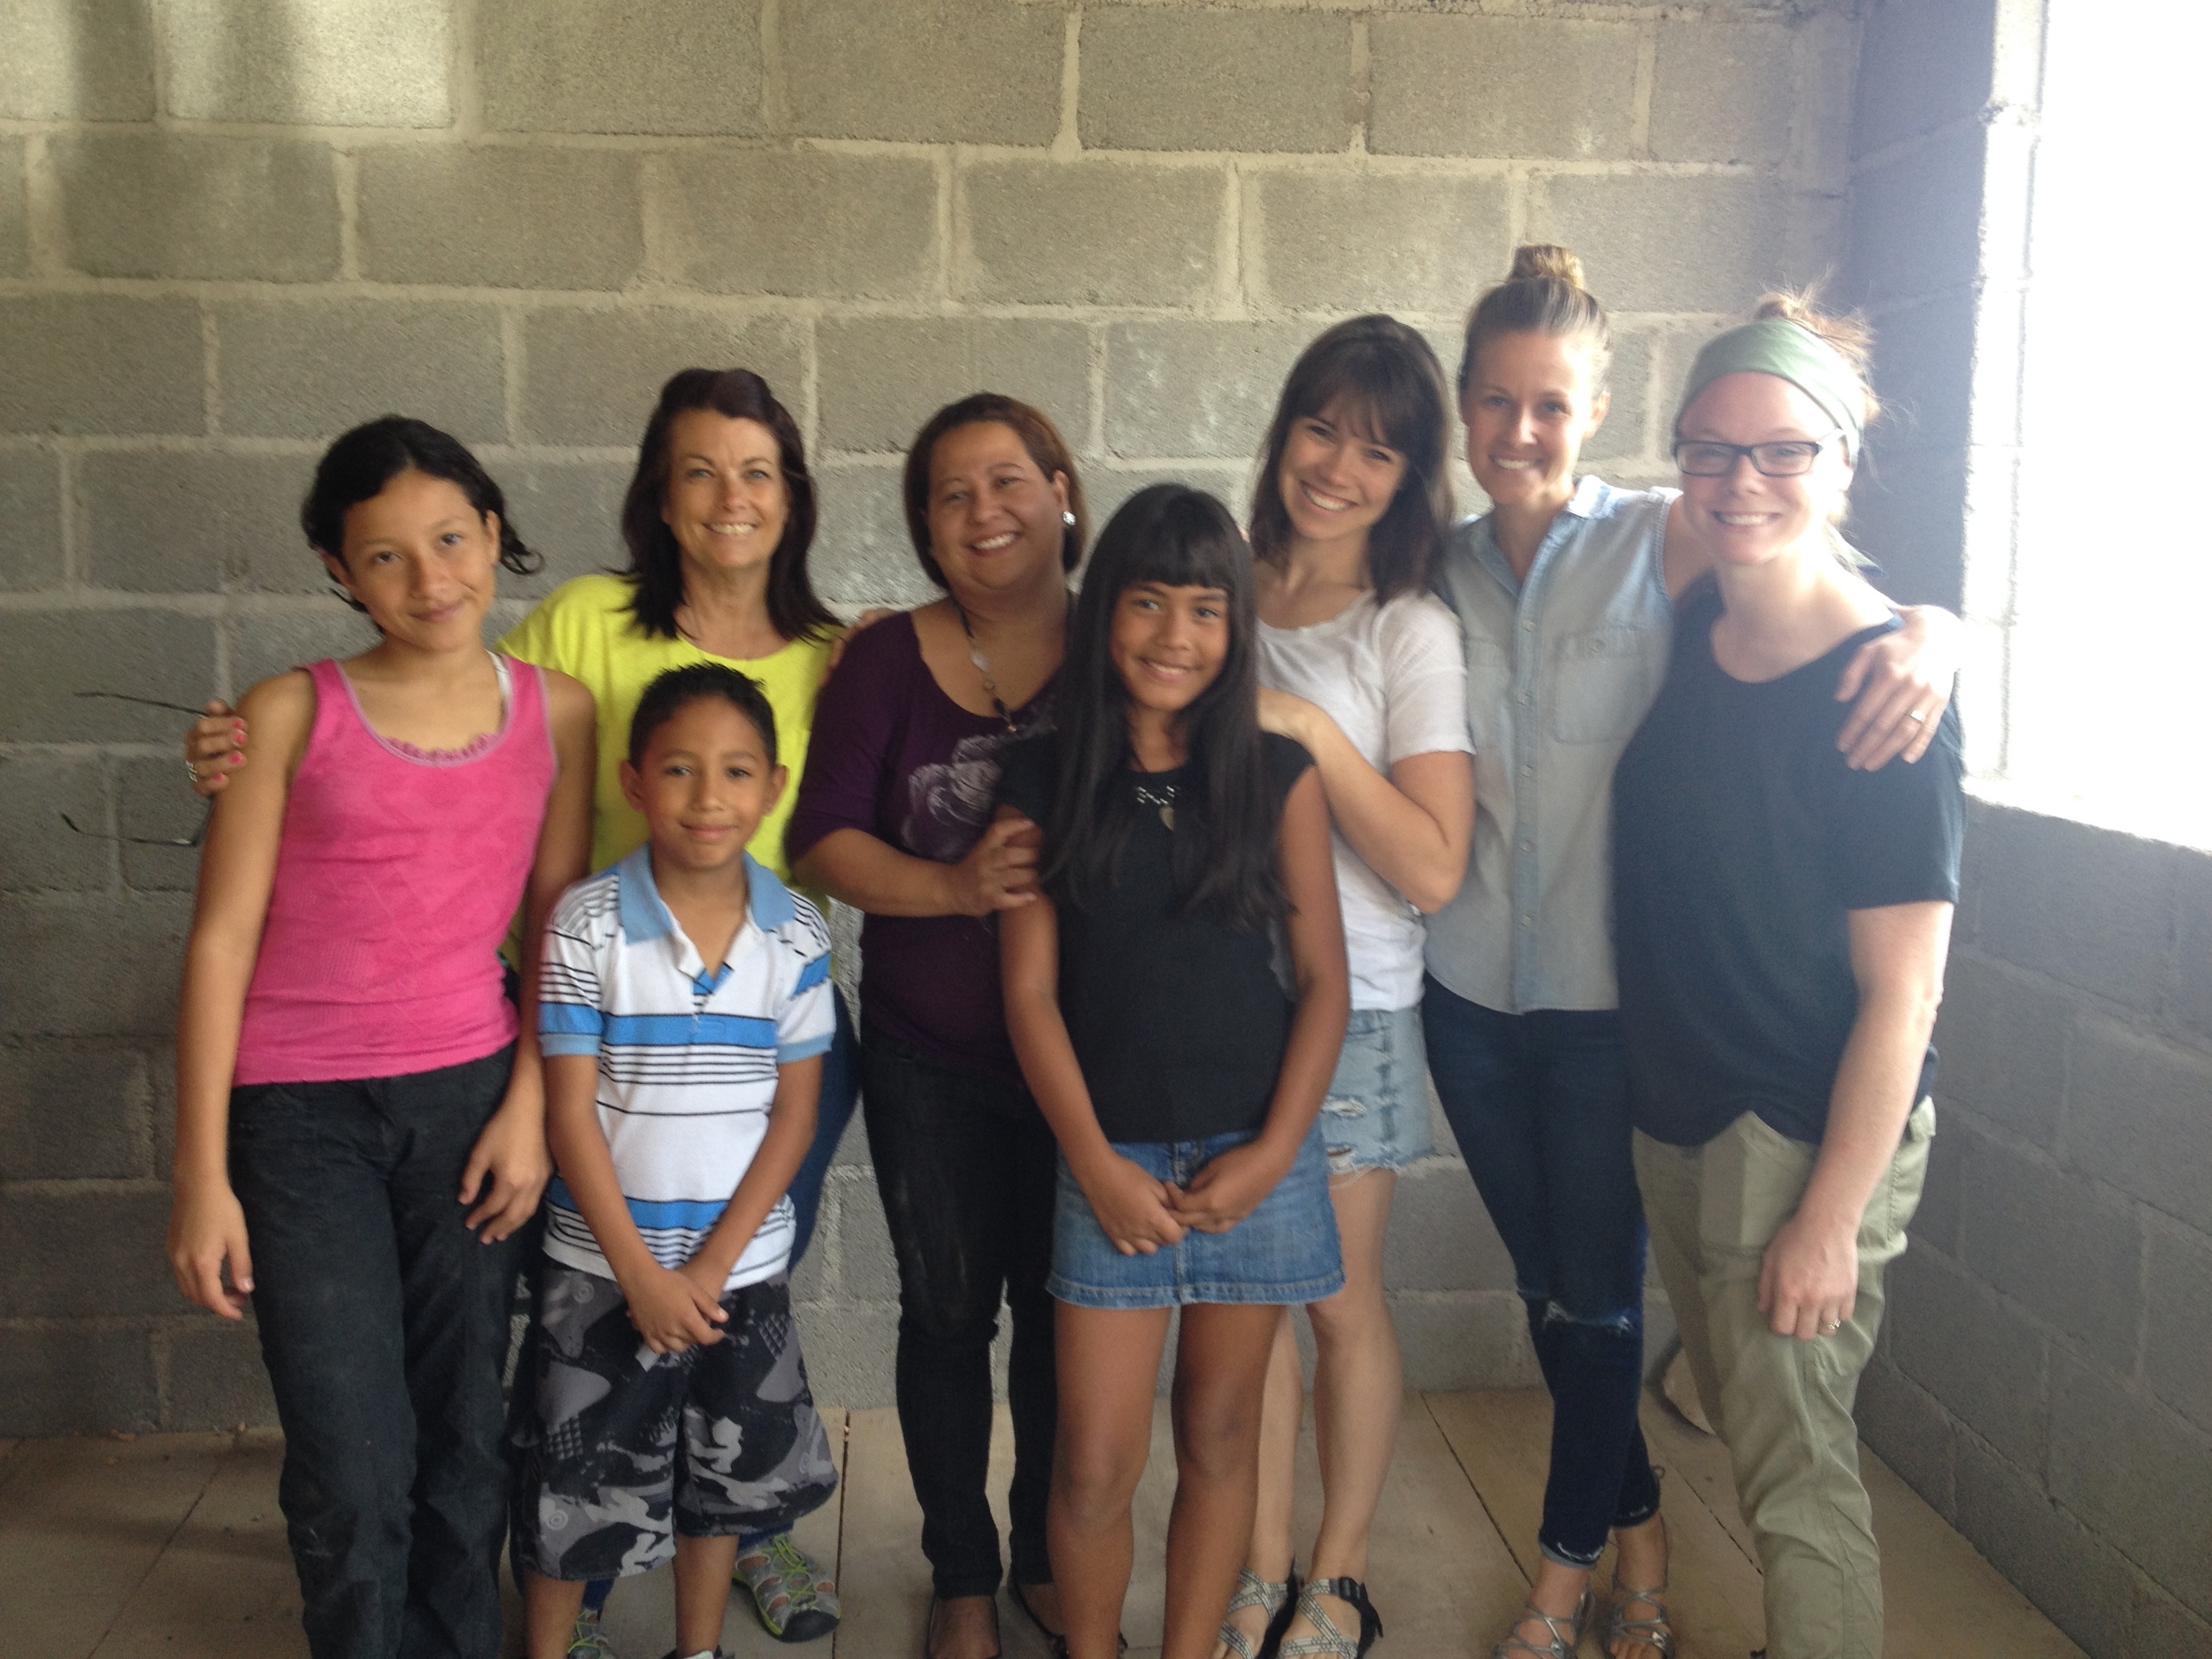  August '14 &nbsp;during a sight visit made by co-founder Lori Connell to see the progress on the salon renovations and sharing Gabriela's story with vistitors 